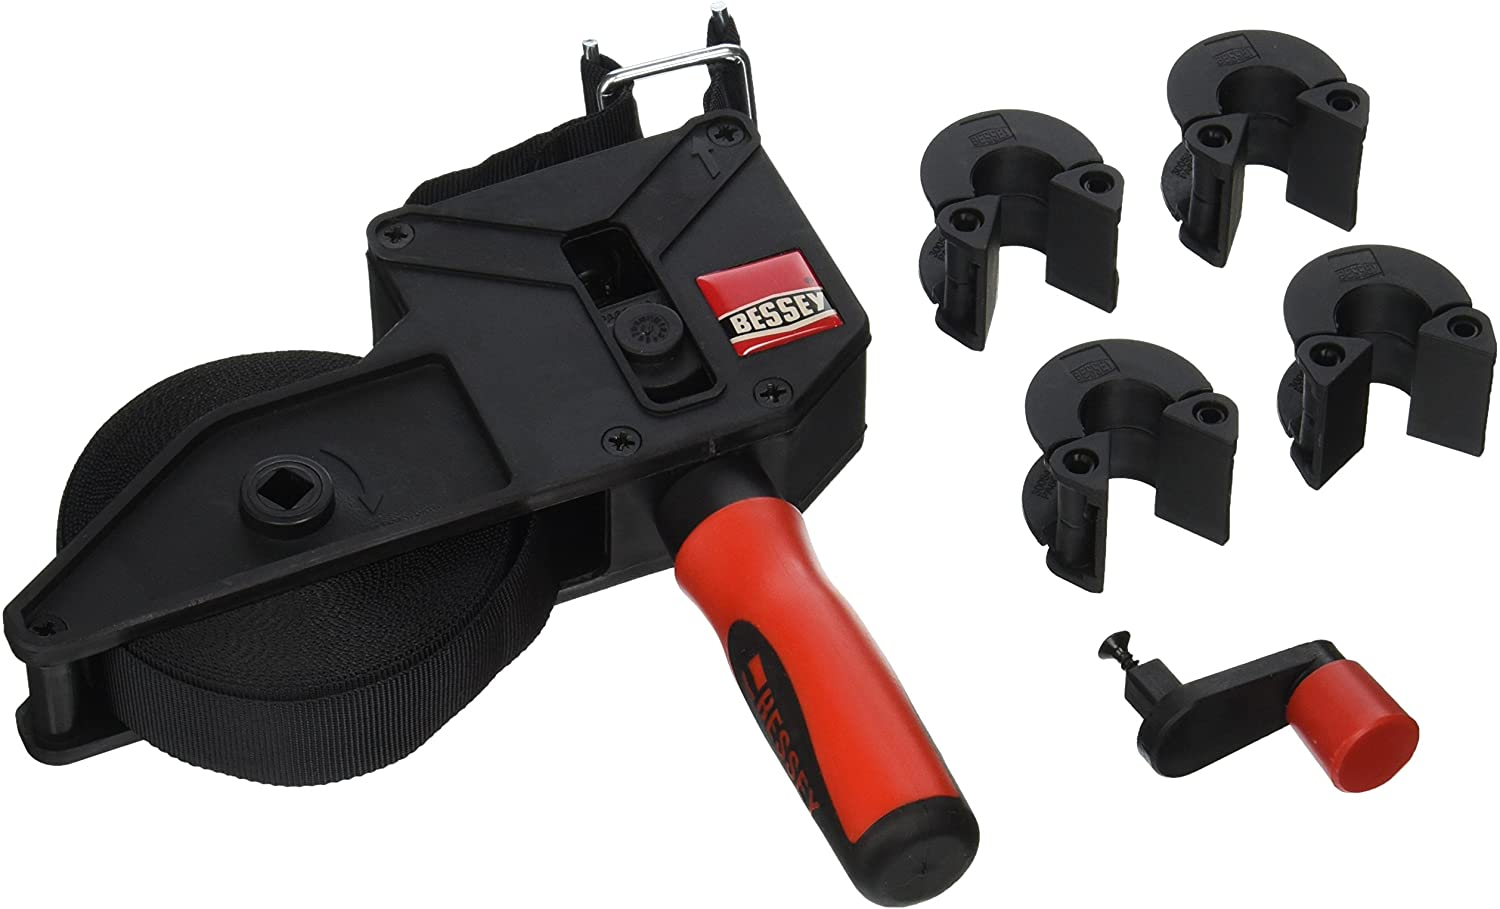 Bessey Tools VAS-23 2K Variable Angle Strap Clamp with 4 Clips,Black with red handle - - Amazon.com $19.36